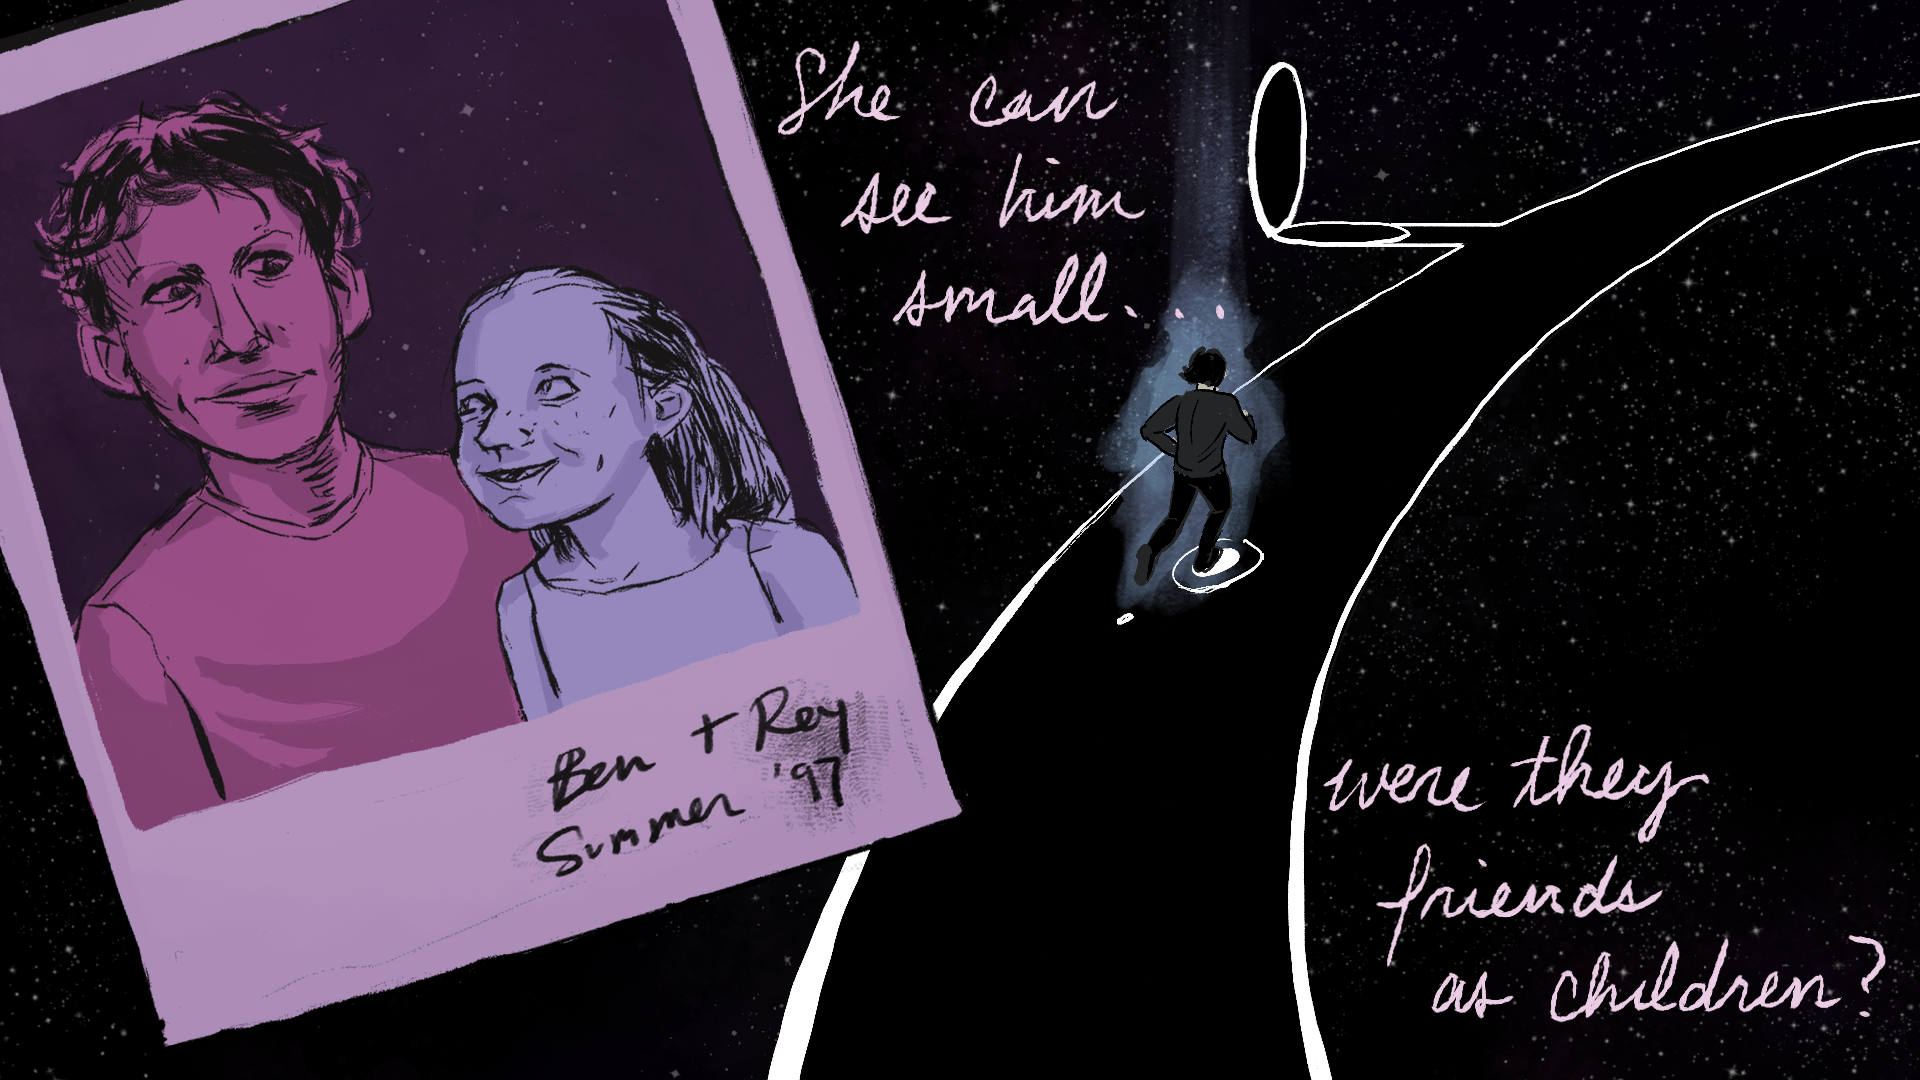 The small figure runs along one of the glowing bridges in the World Between Worlds. There's a Polaroid showing a boy with big ears and a girl, several years younger, grinning up at him; the caption reads "Ben + Rey, summer '97." Text: "She can see him small. Were they friends as children?"